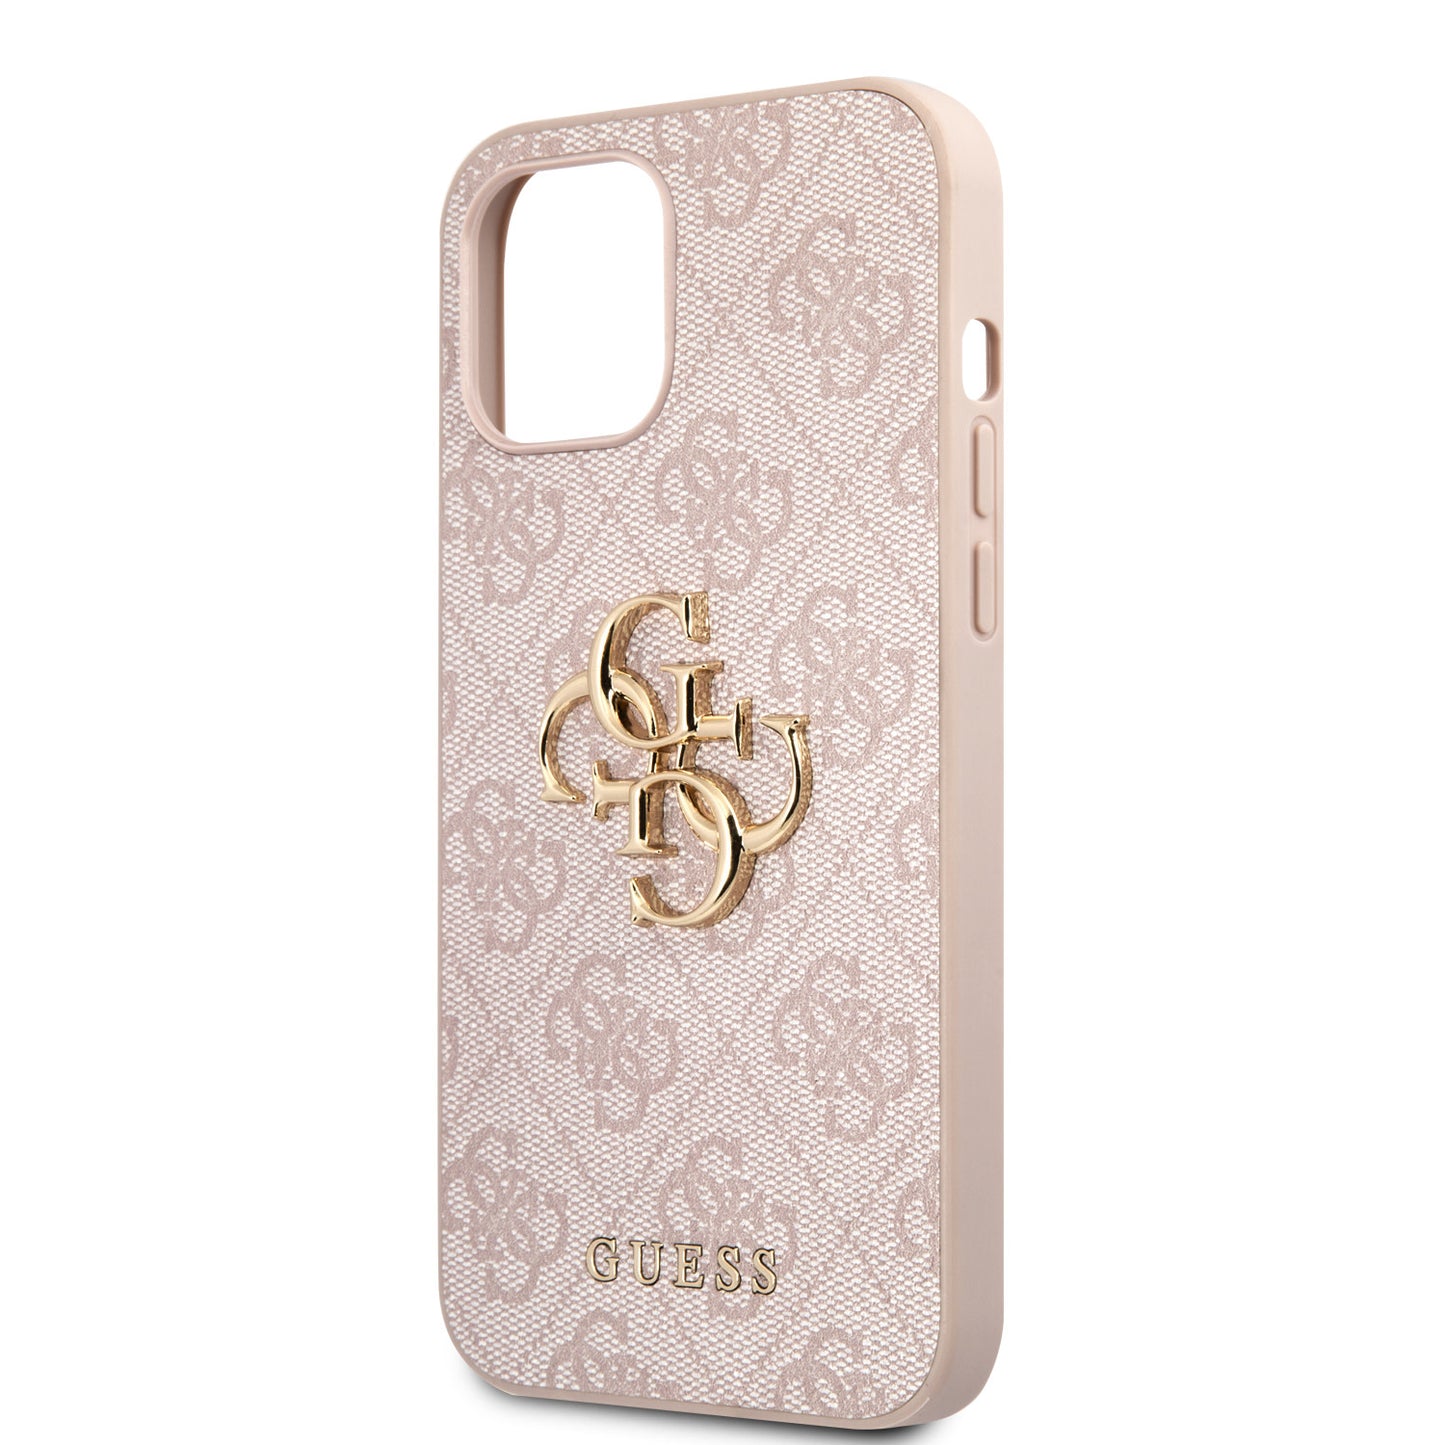 Guess iPhone 12/12 PRO Backcover - Gold 4G Logo - Roze